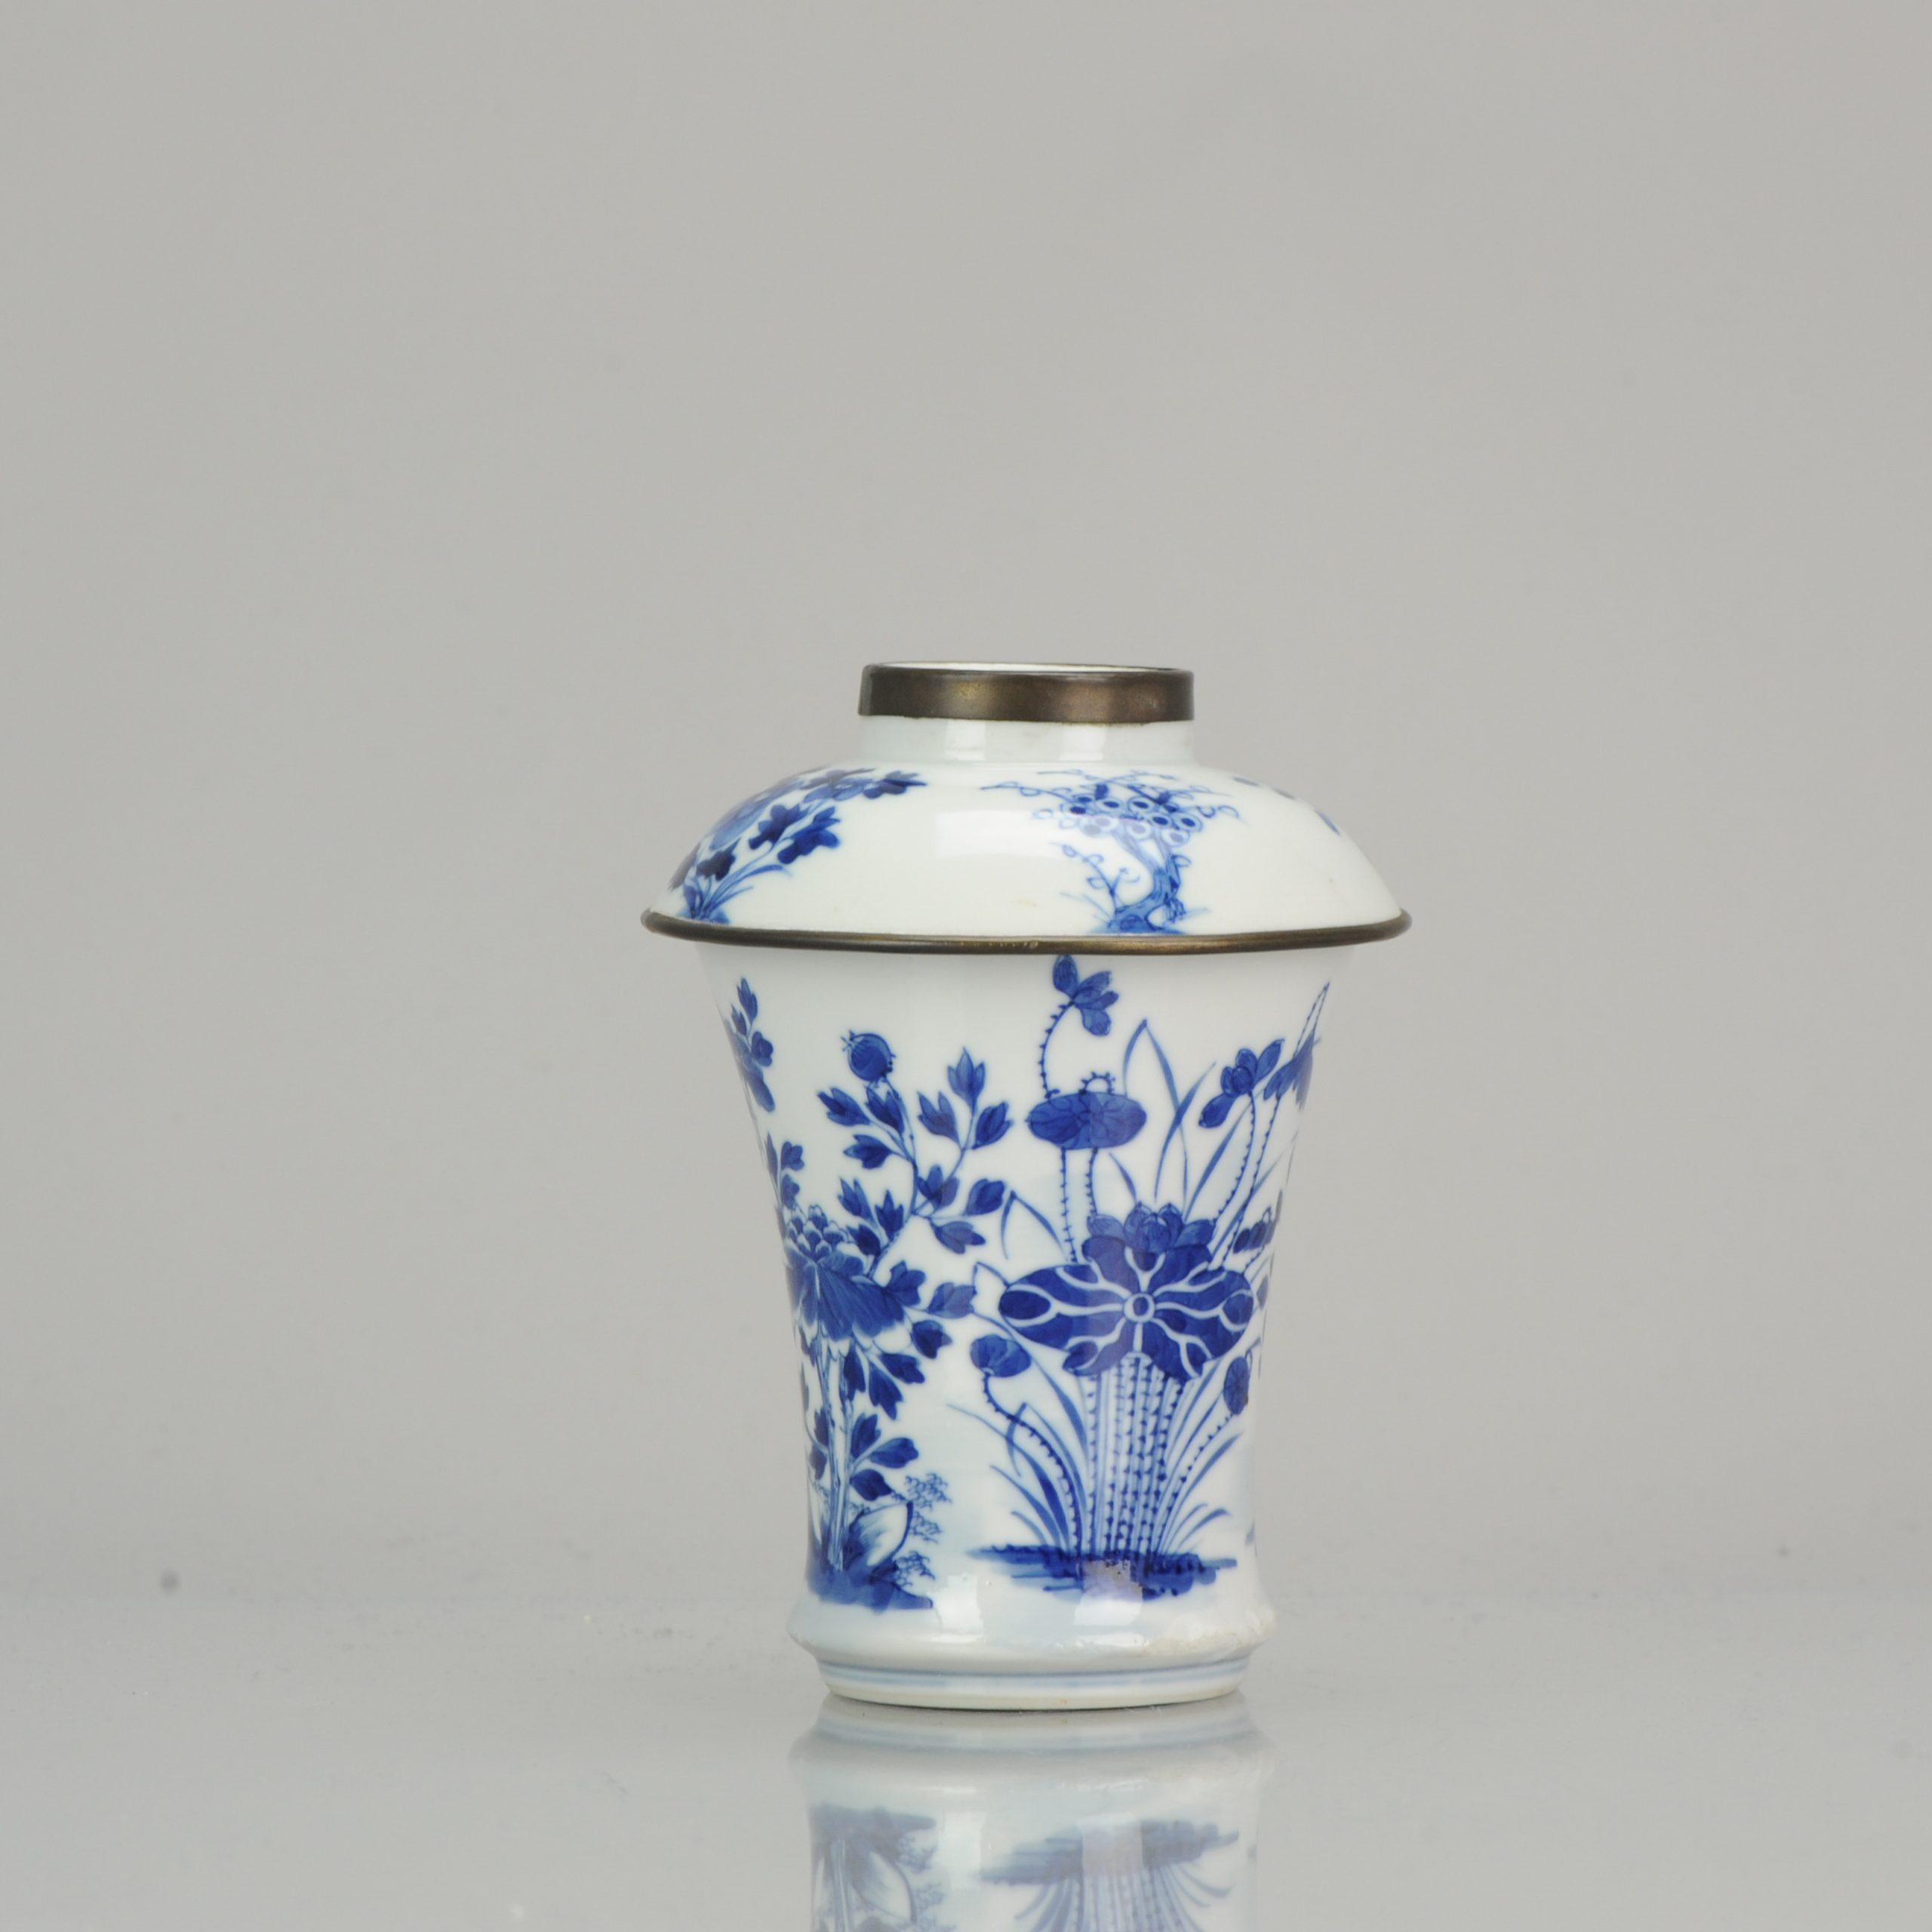 A top quality Bleu de Hue Lidded Jar with flowers. China, 19th century. For the Vietnamese market

Marked: to be examined

Bleu de Hue

Chinese blue and white export porcelain for the Vietnamese market. The best 